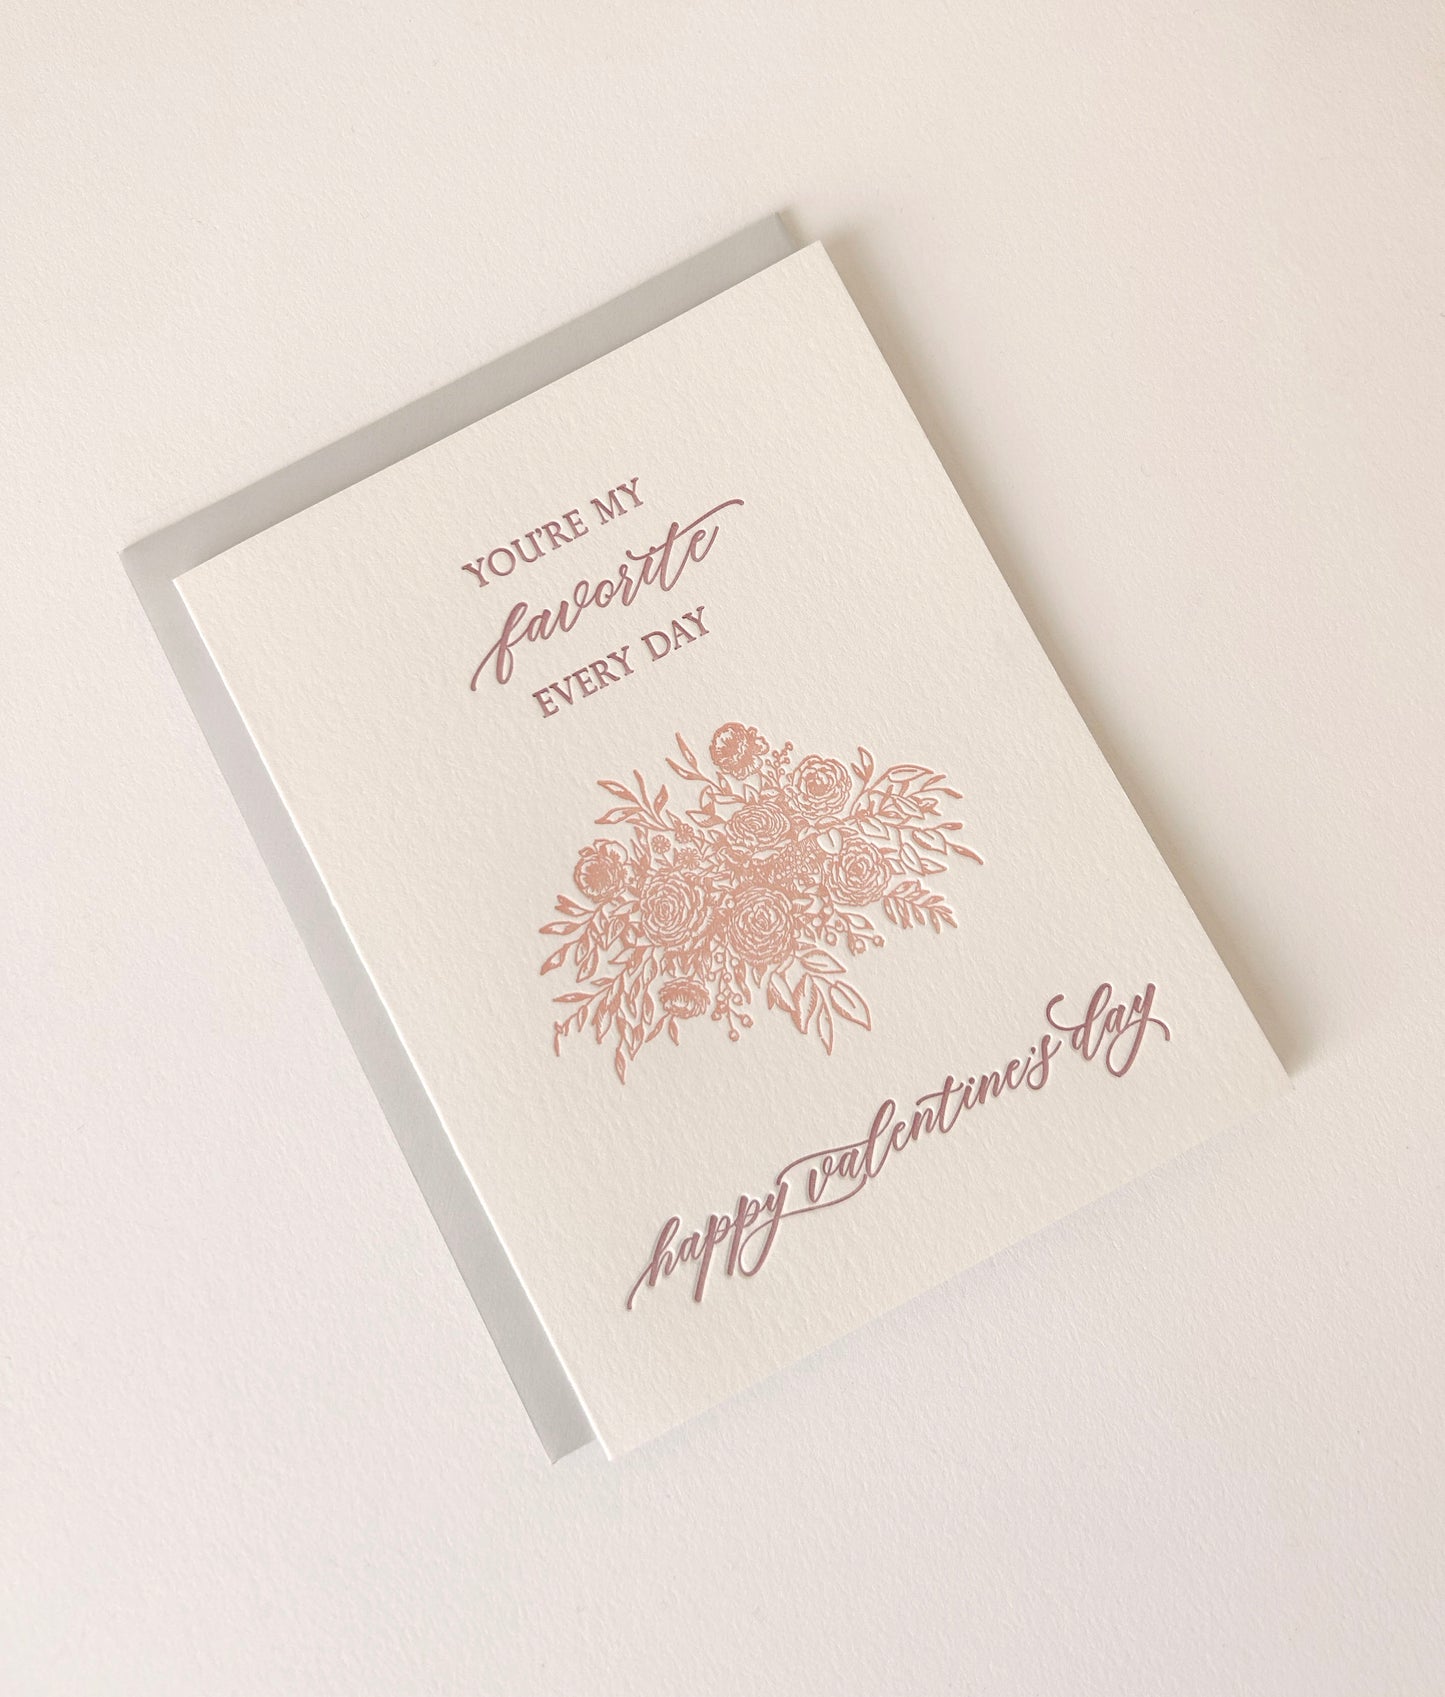 Letterpress valentine card with florals that says "You're My Favorite Every Day Happy Valentine's Day" by Rust Belt Love